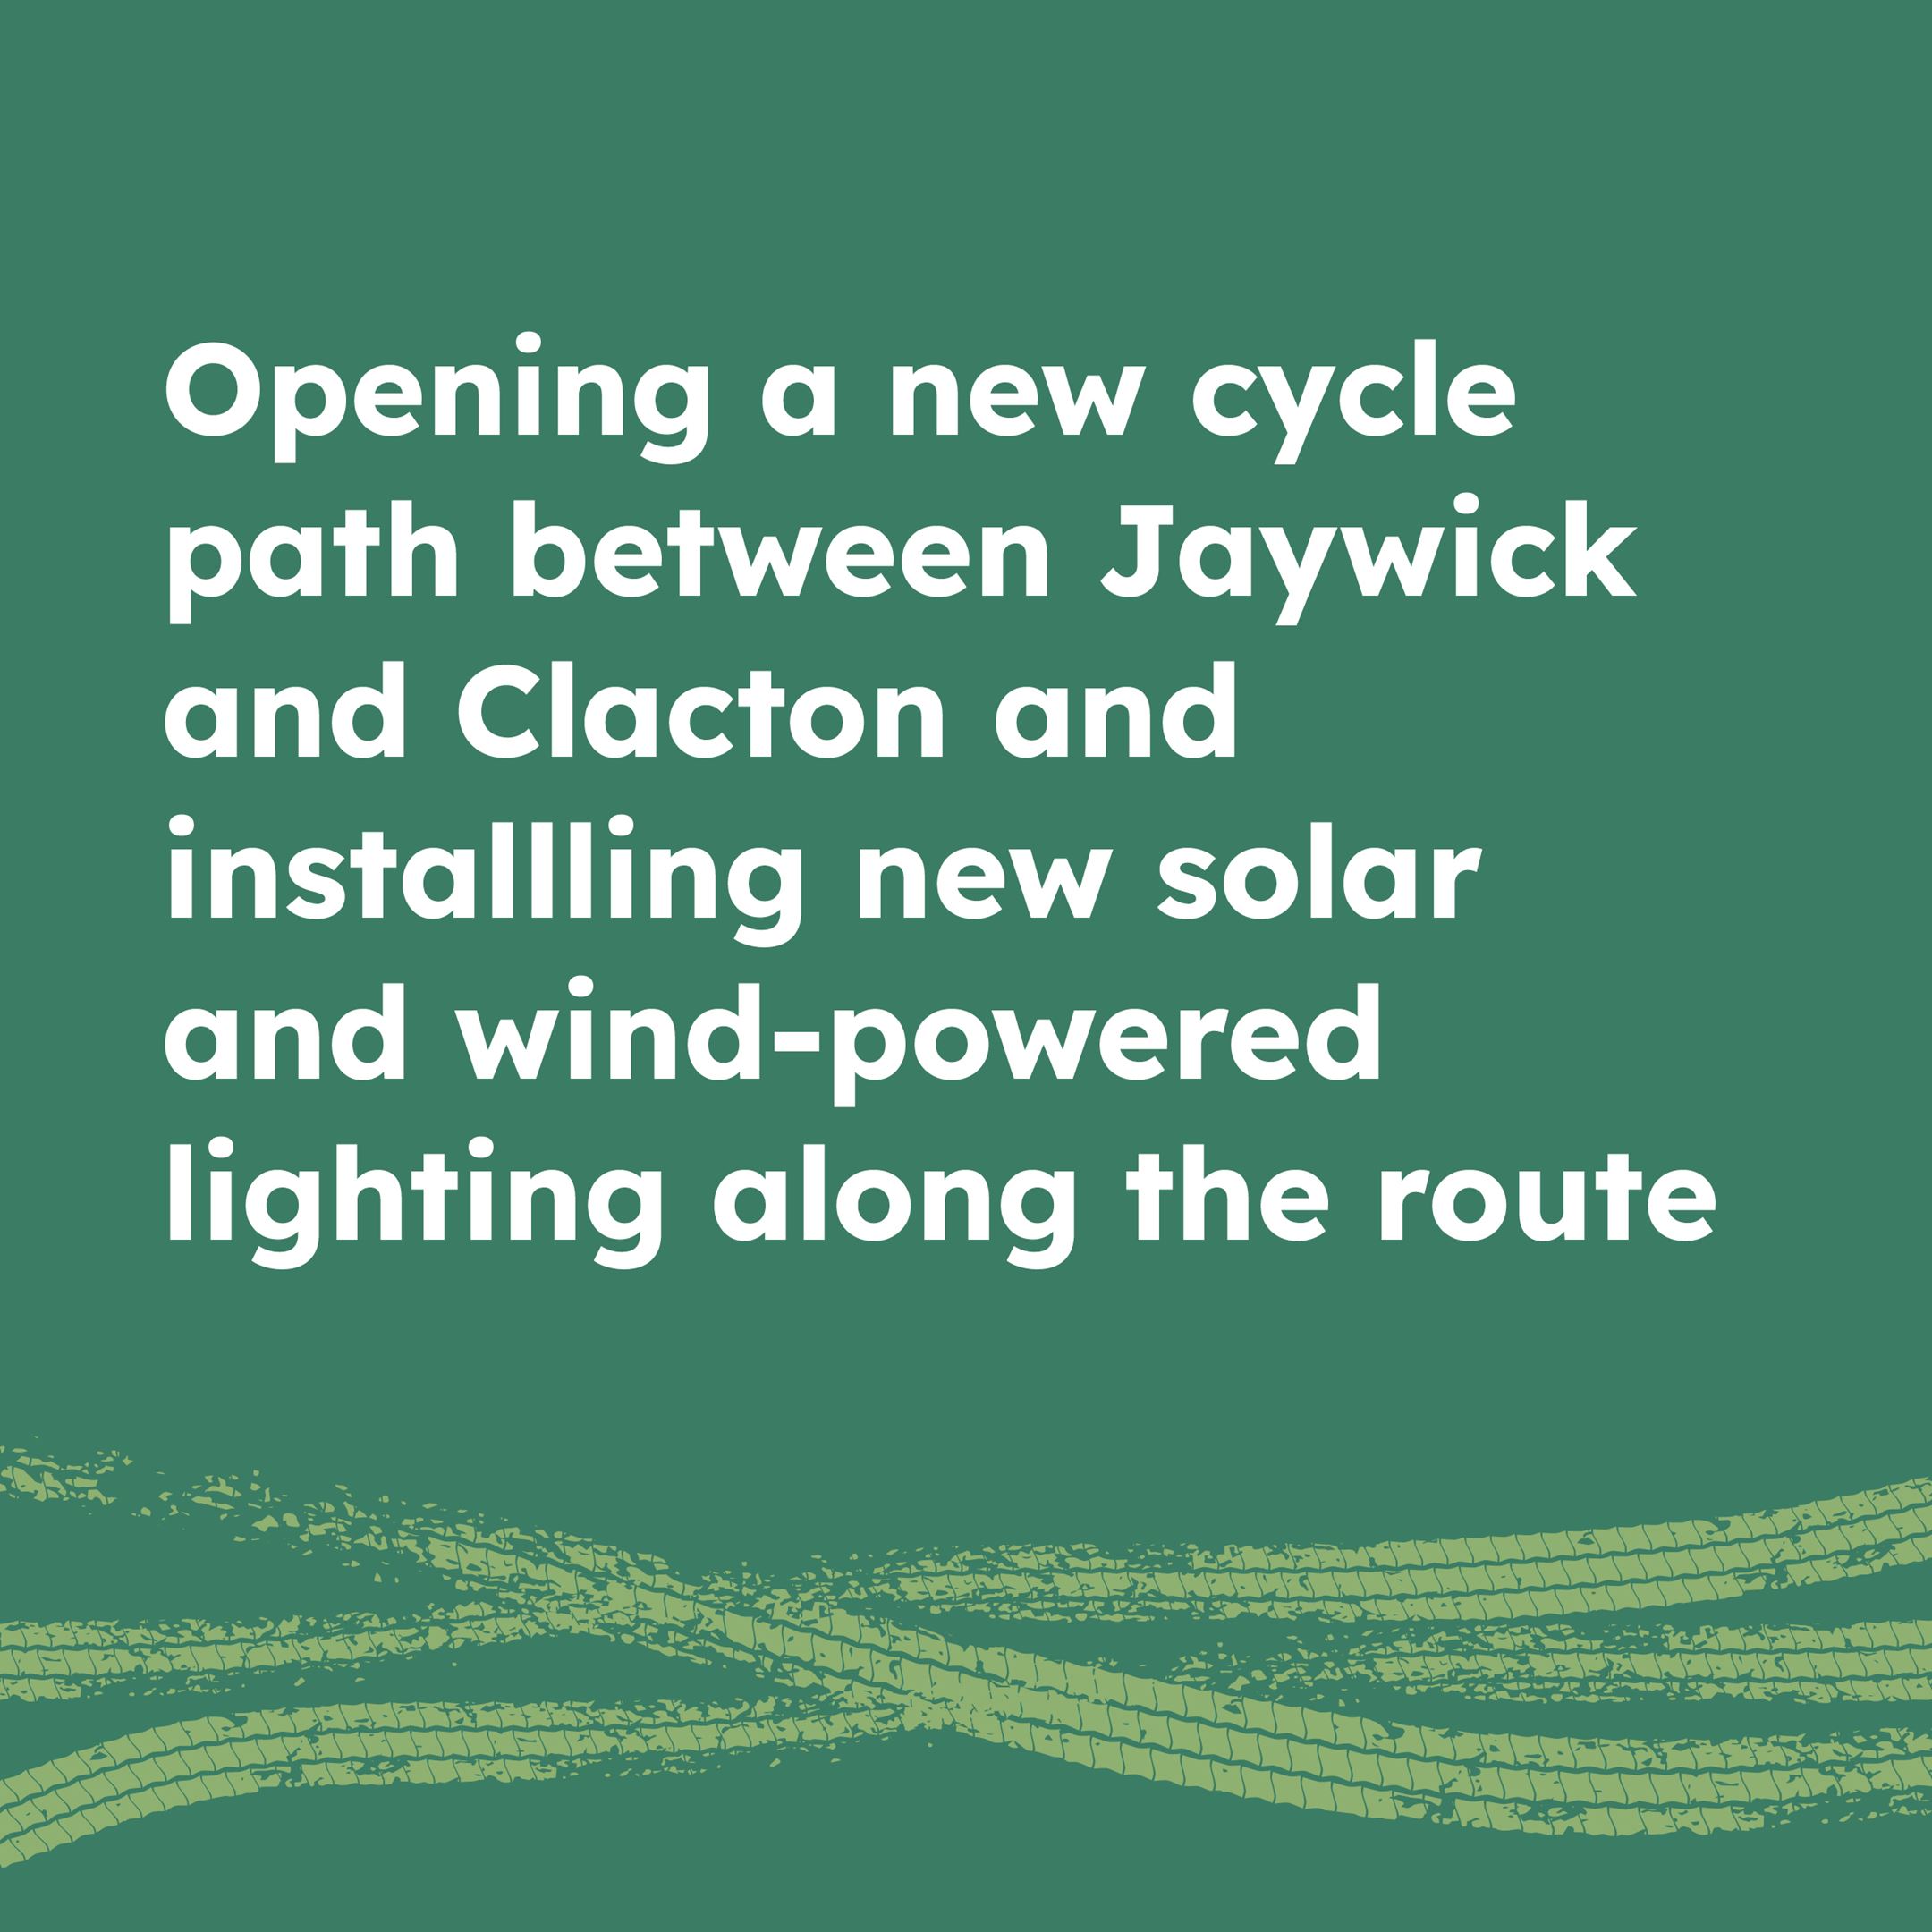 Opening a new cycle path between Jaywick and Clacton and installling new solar and wind-powered lighting along the route